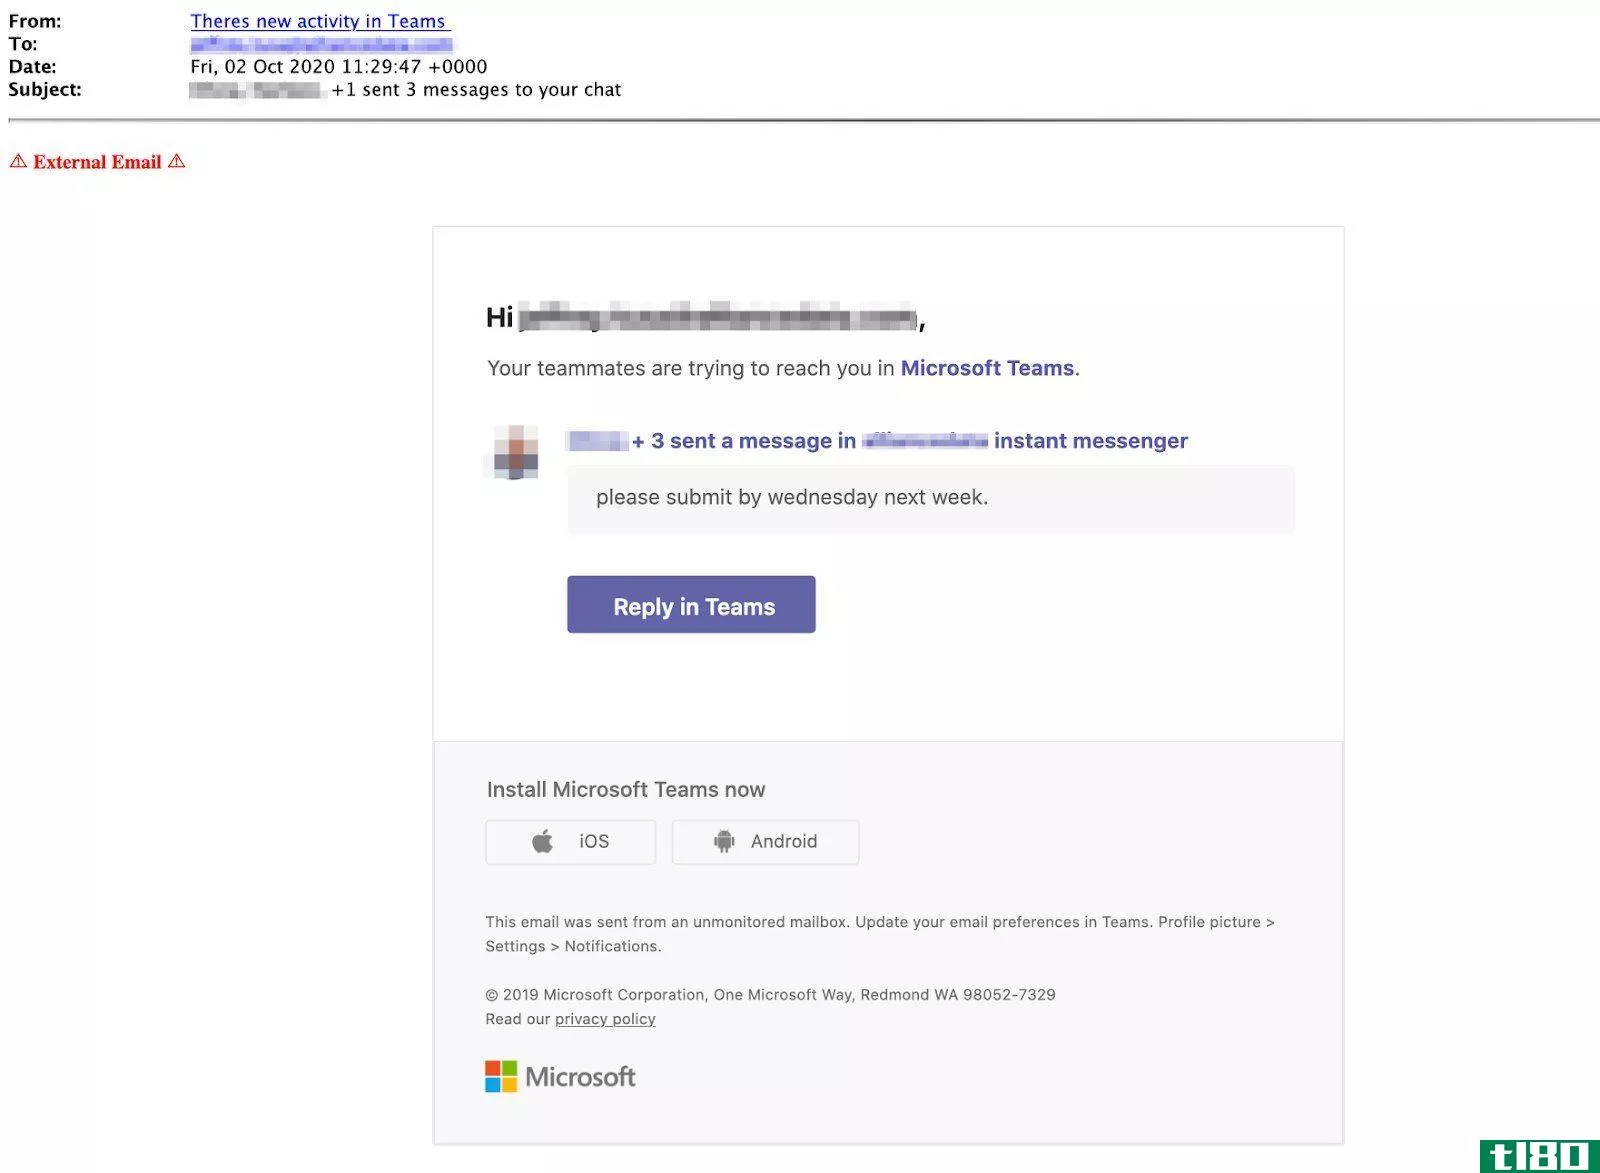 An example Microsoft Teams phishing email